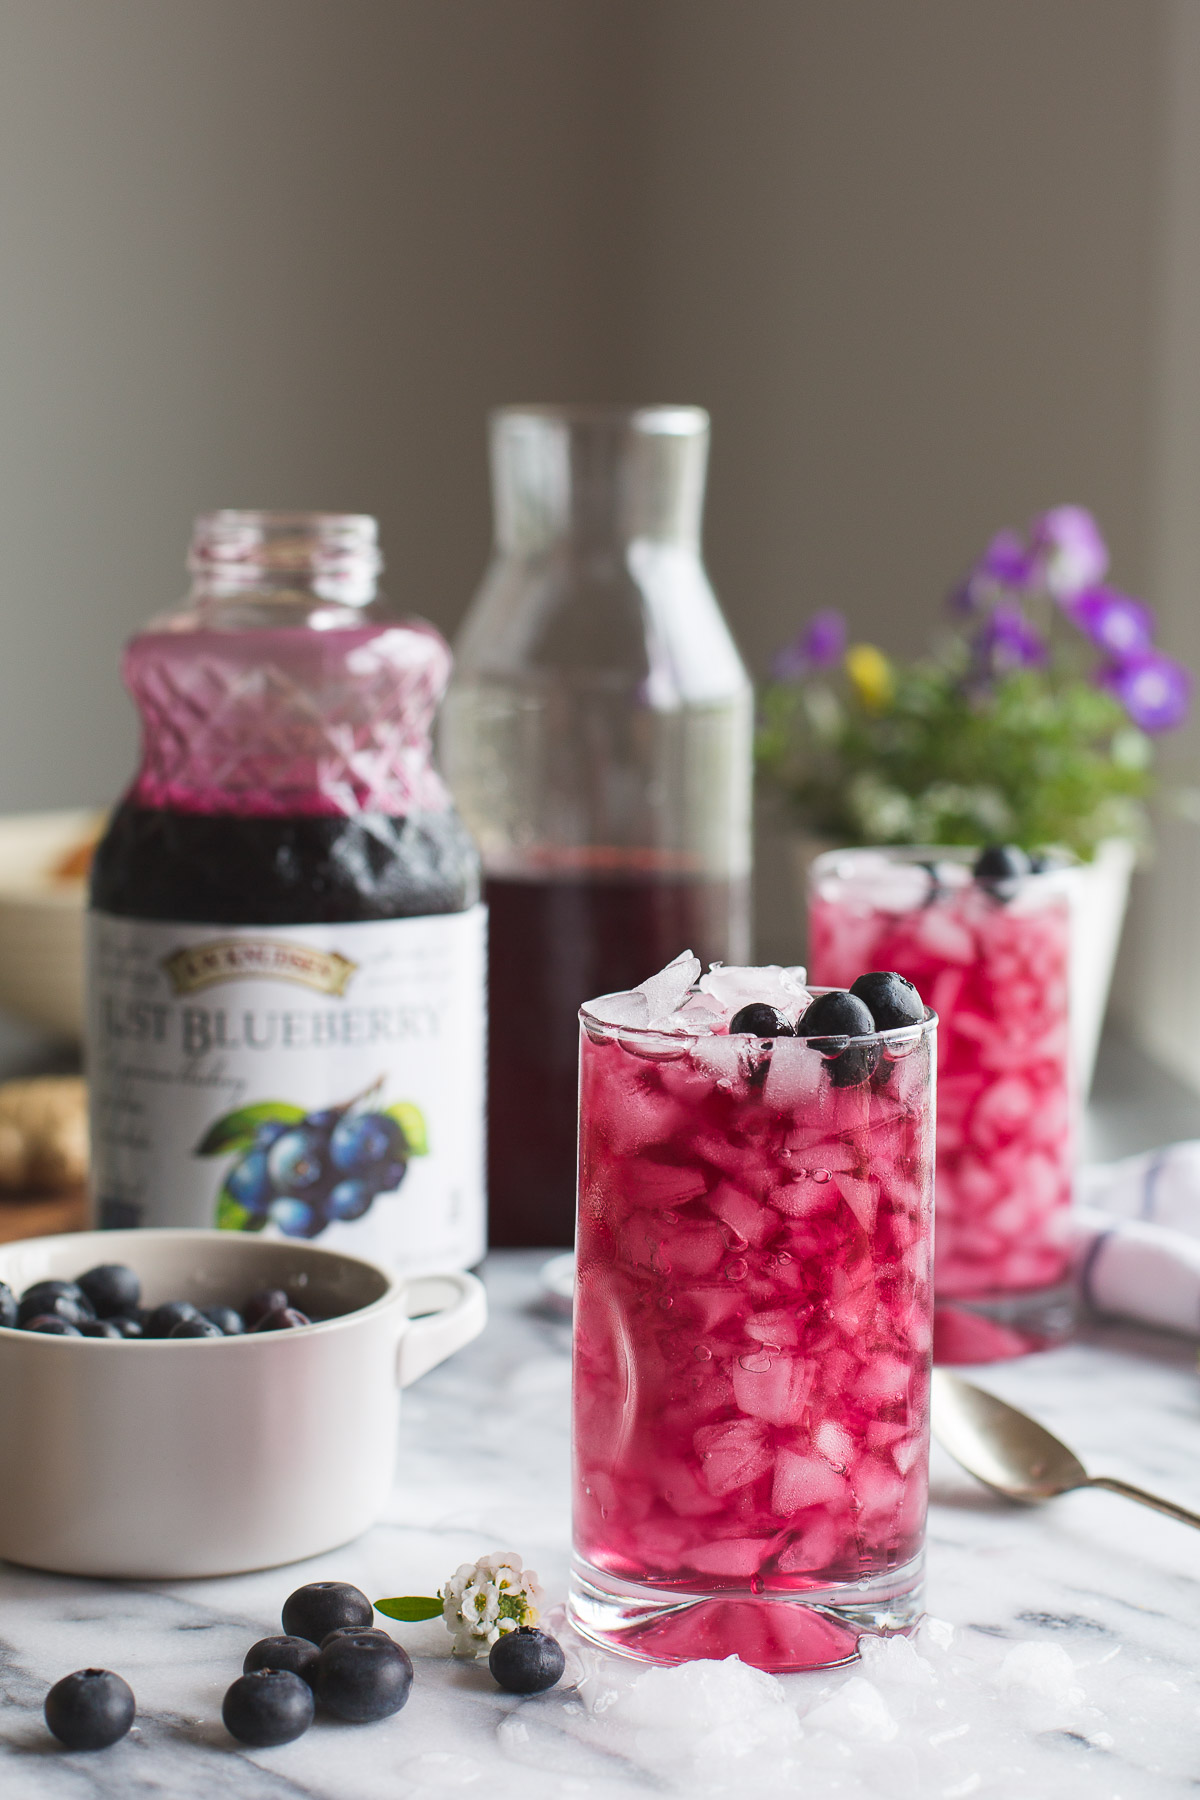 This Blueberry Switchel, or Haymaker's Punch is a fresh twist on an old time farmer's recipe. Do away with artificial sports or energy drinks and enjoy this natural thirst quenching drink. Vegan | Gluten Free | No Refined Sugar | @tasteLUVnourish